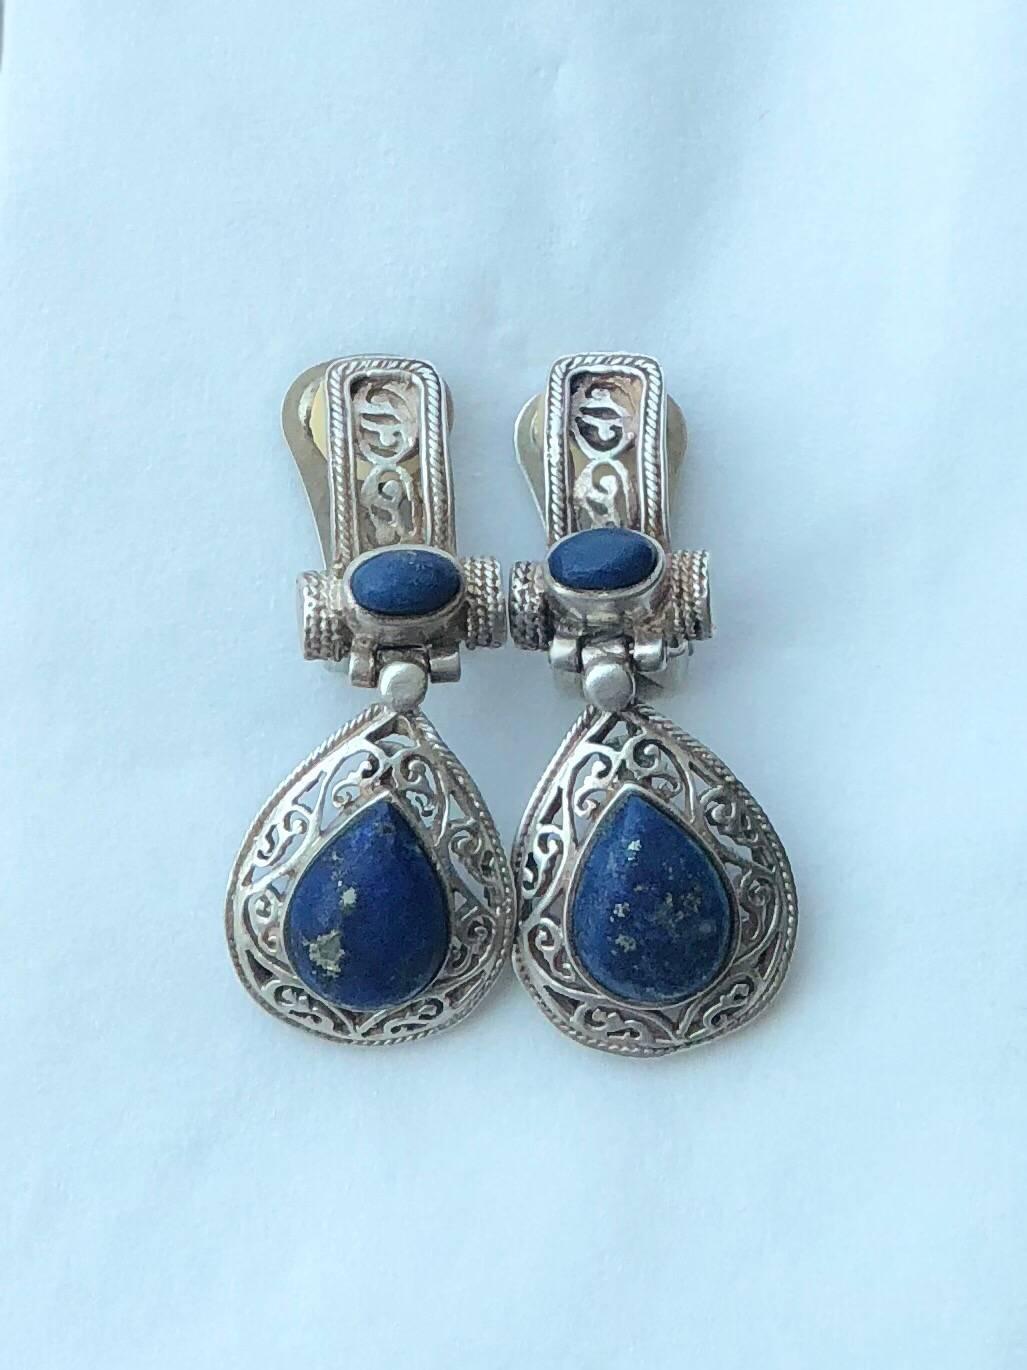 Antique style Italian sterling silver earrings lapis lazuli with clips.